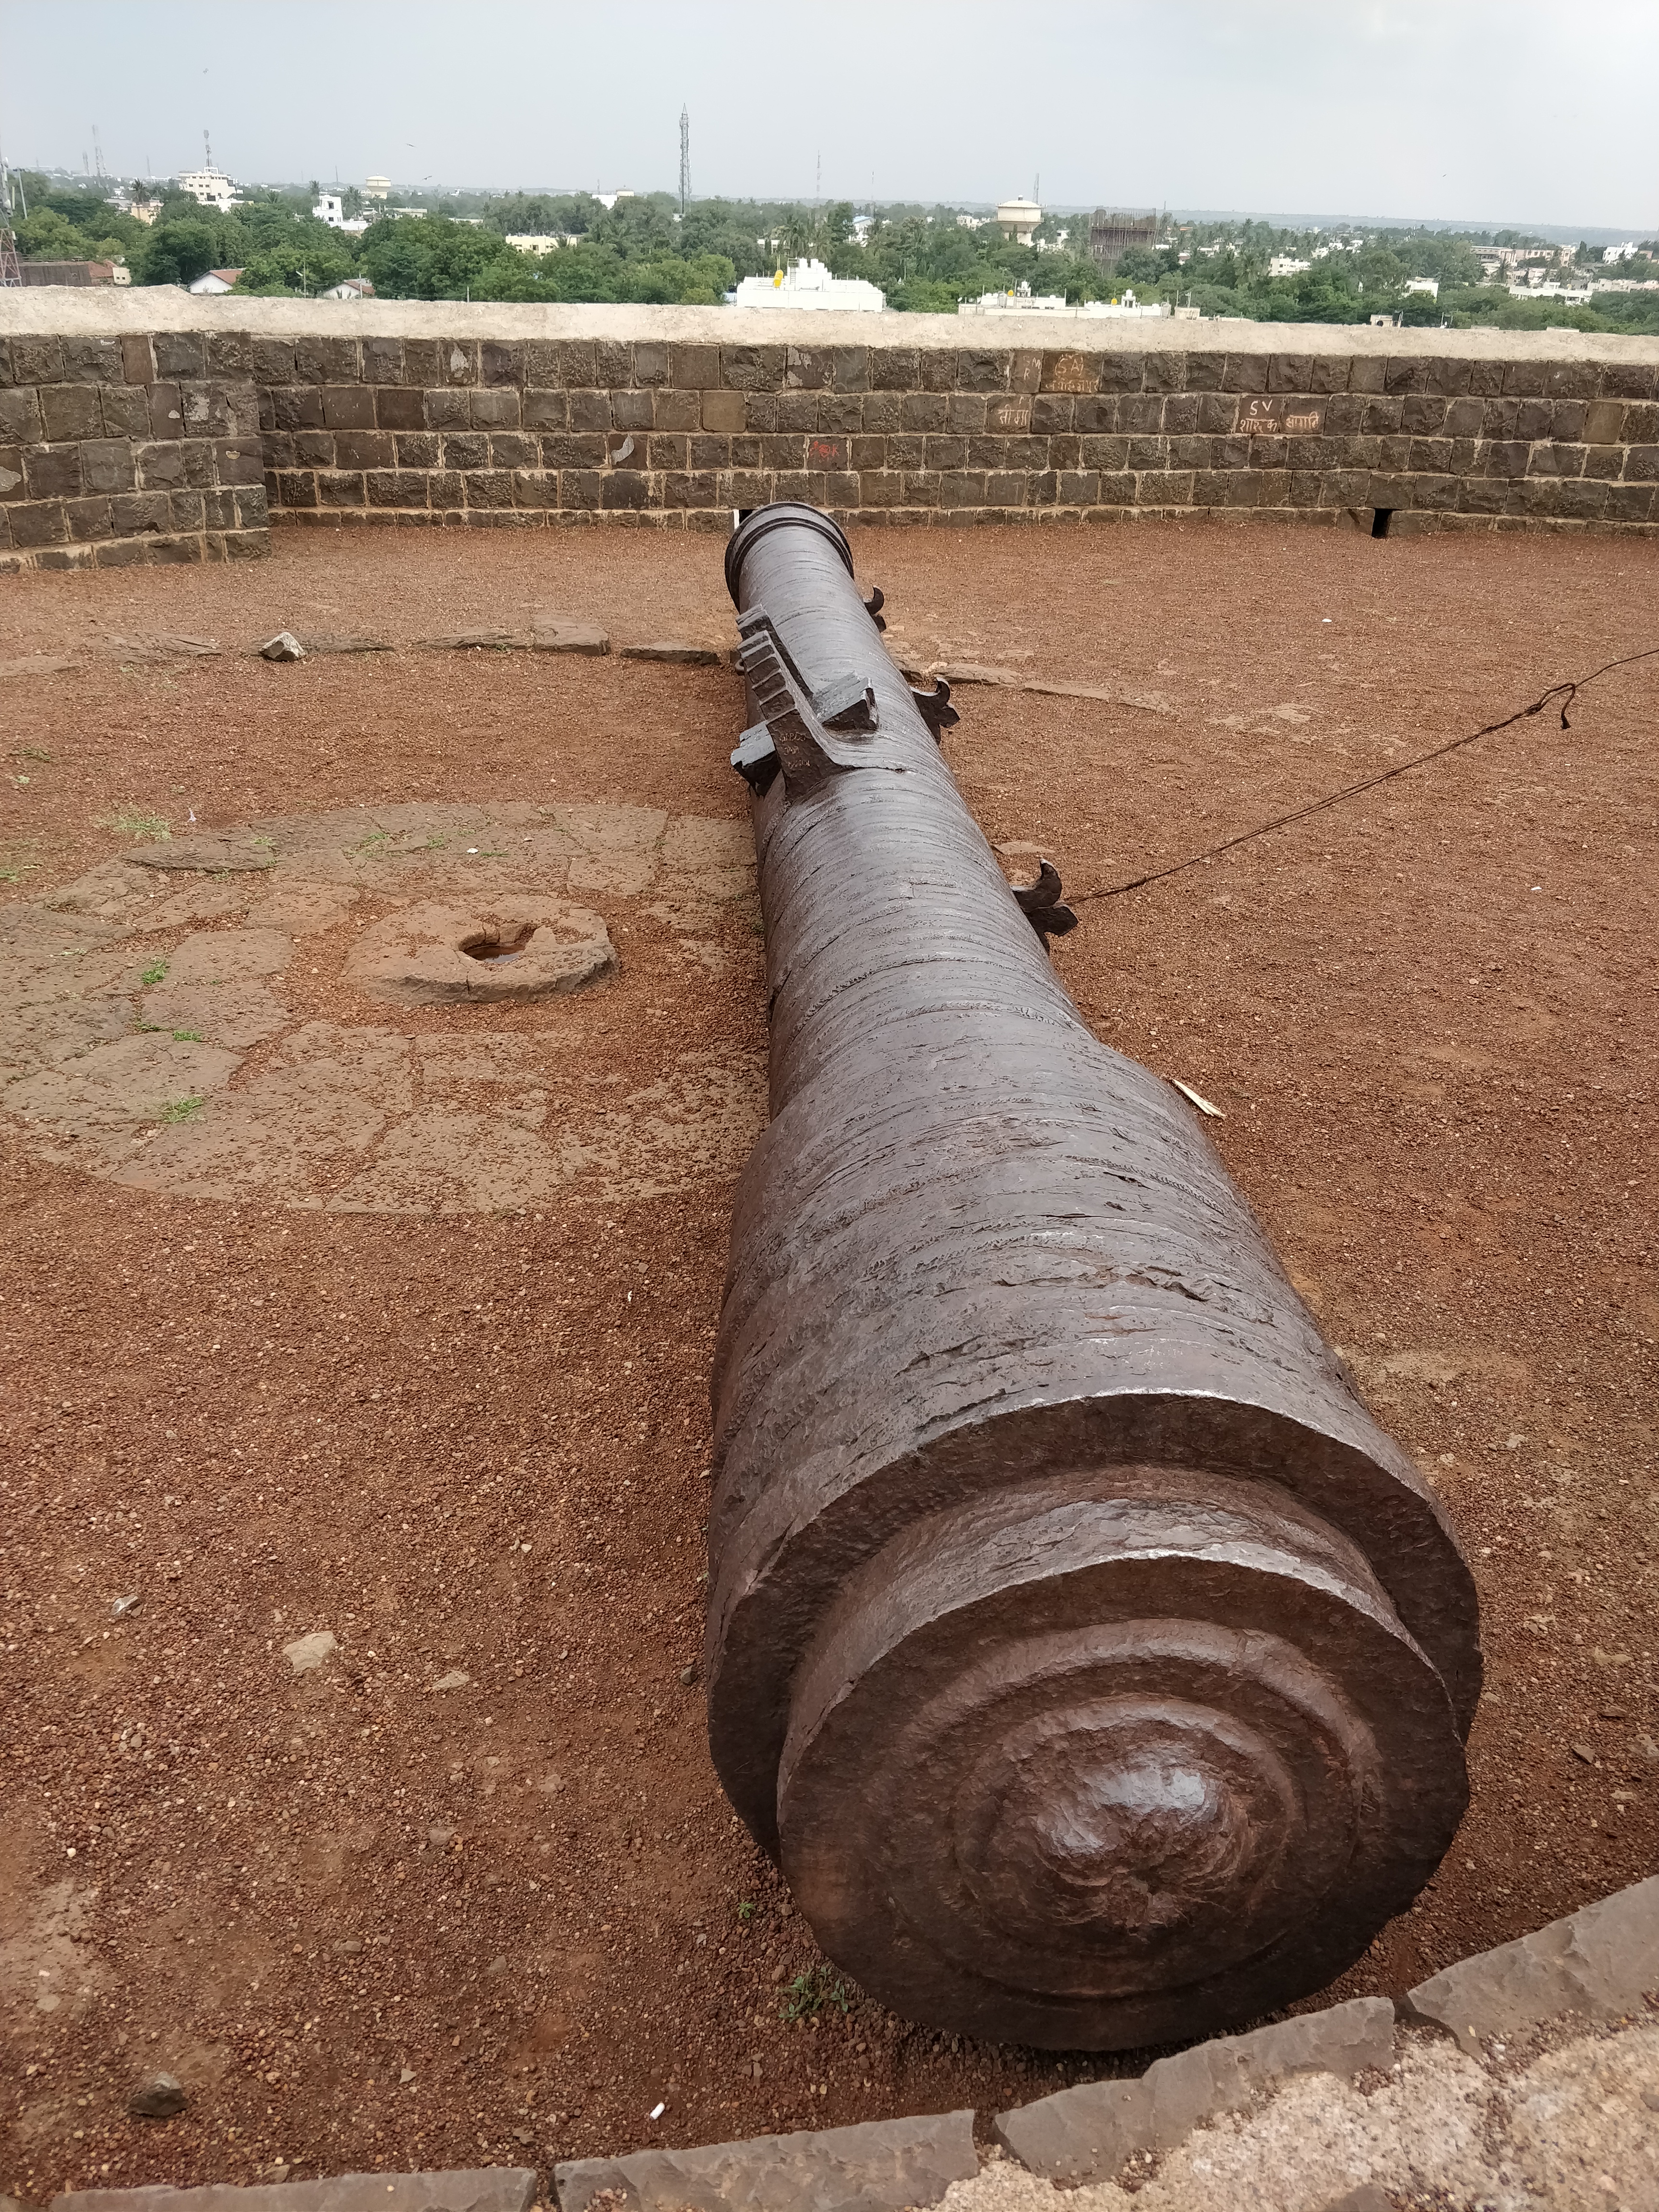 back view of the cannon